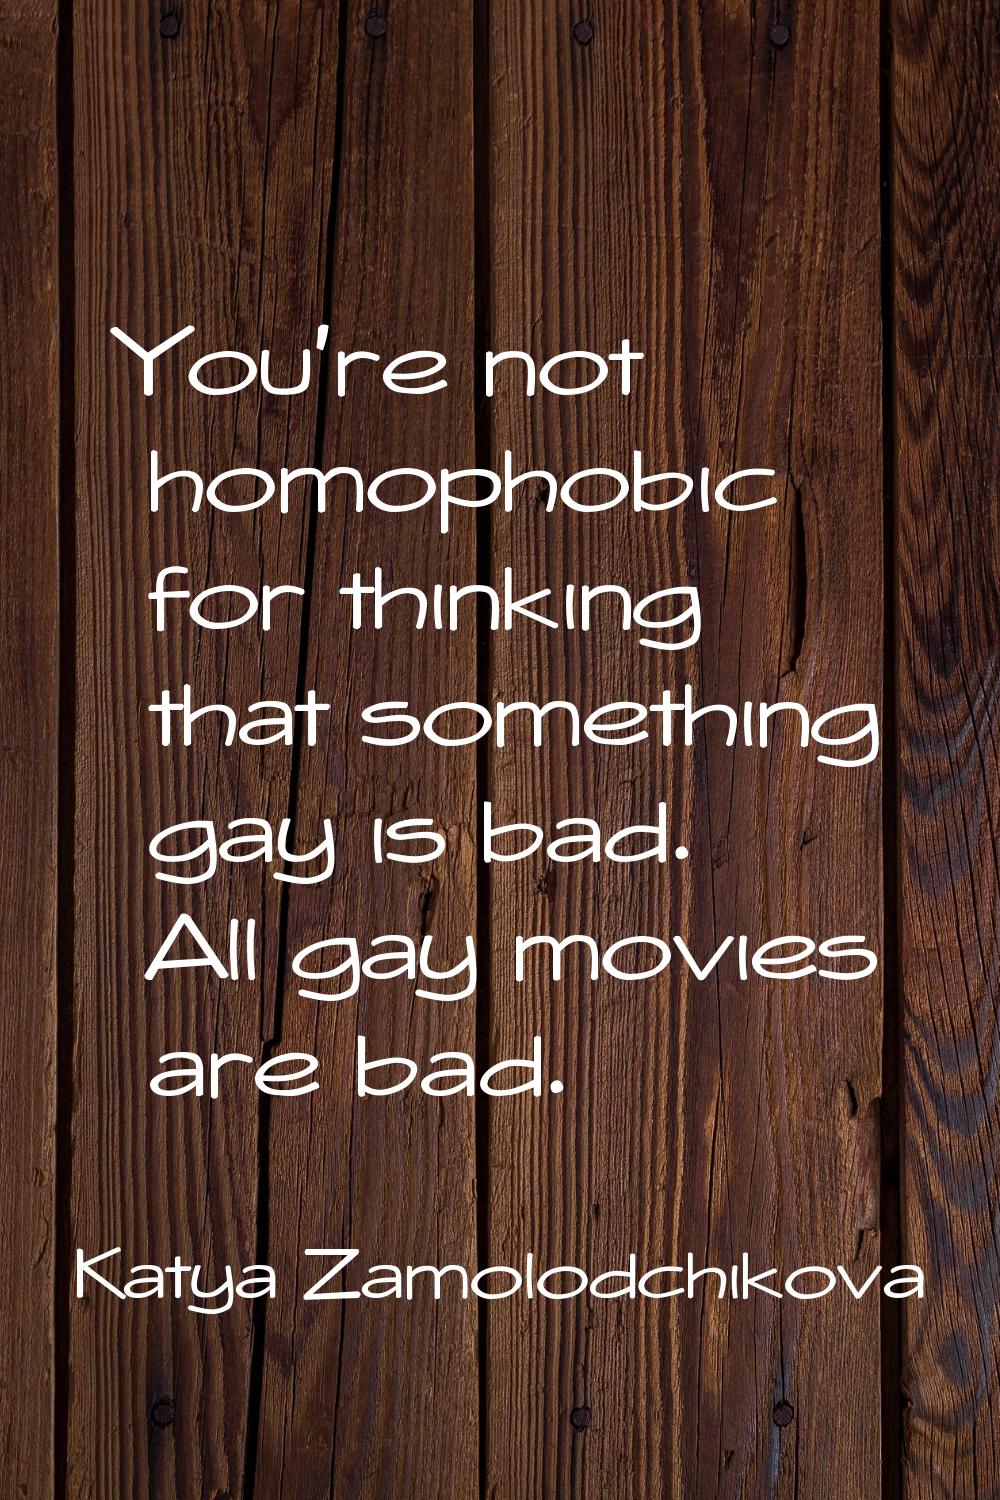 You're not homophobic for thinking that something gay is bad. All gay movies are bad.